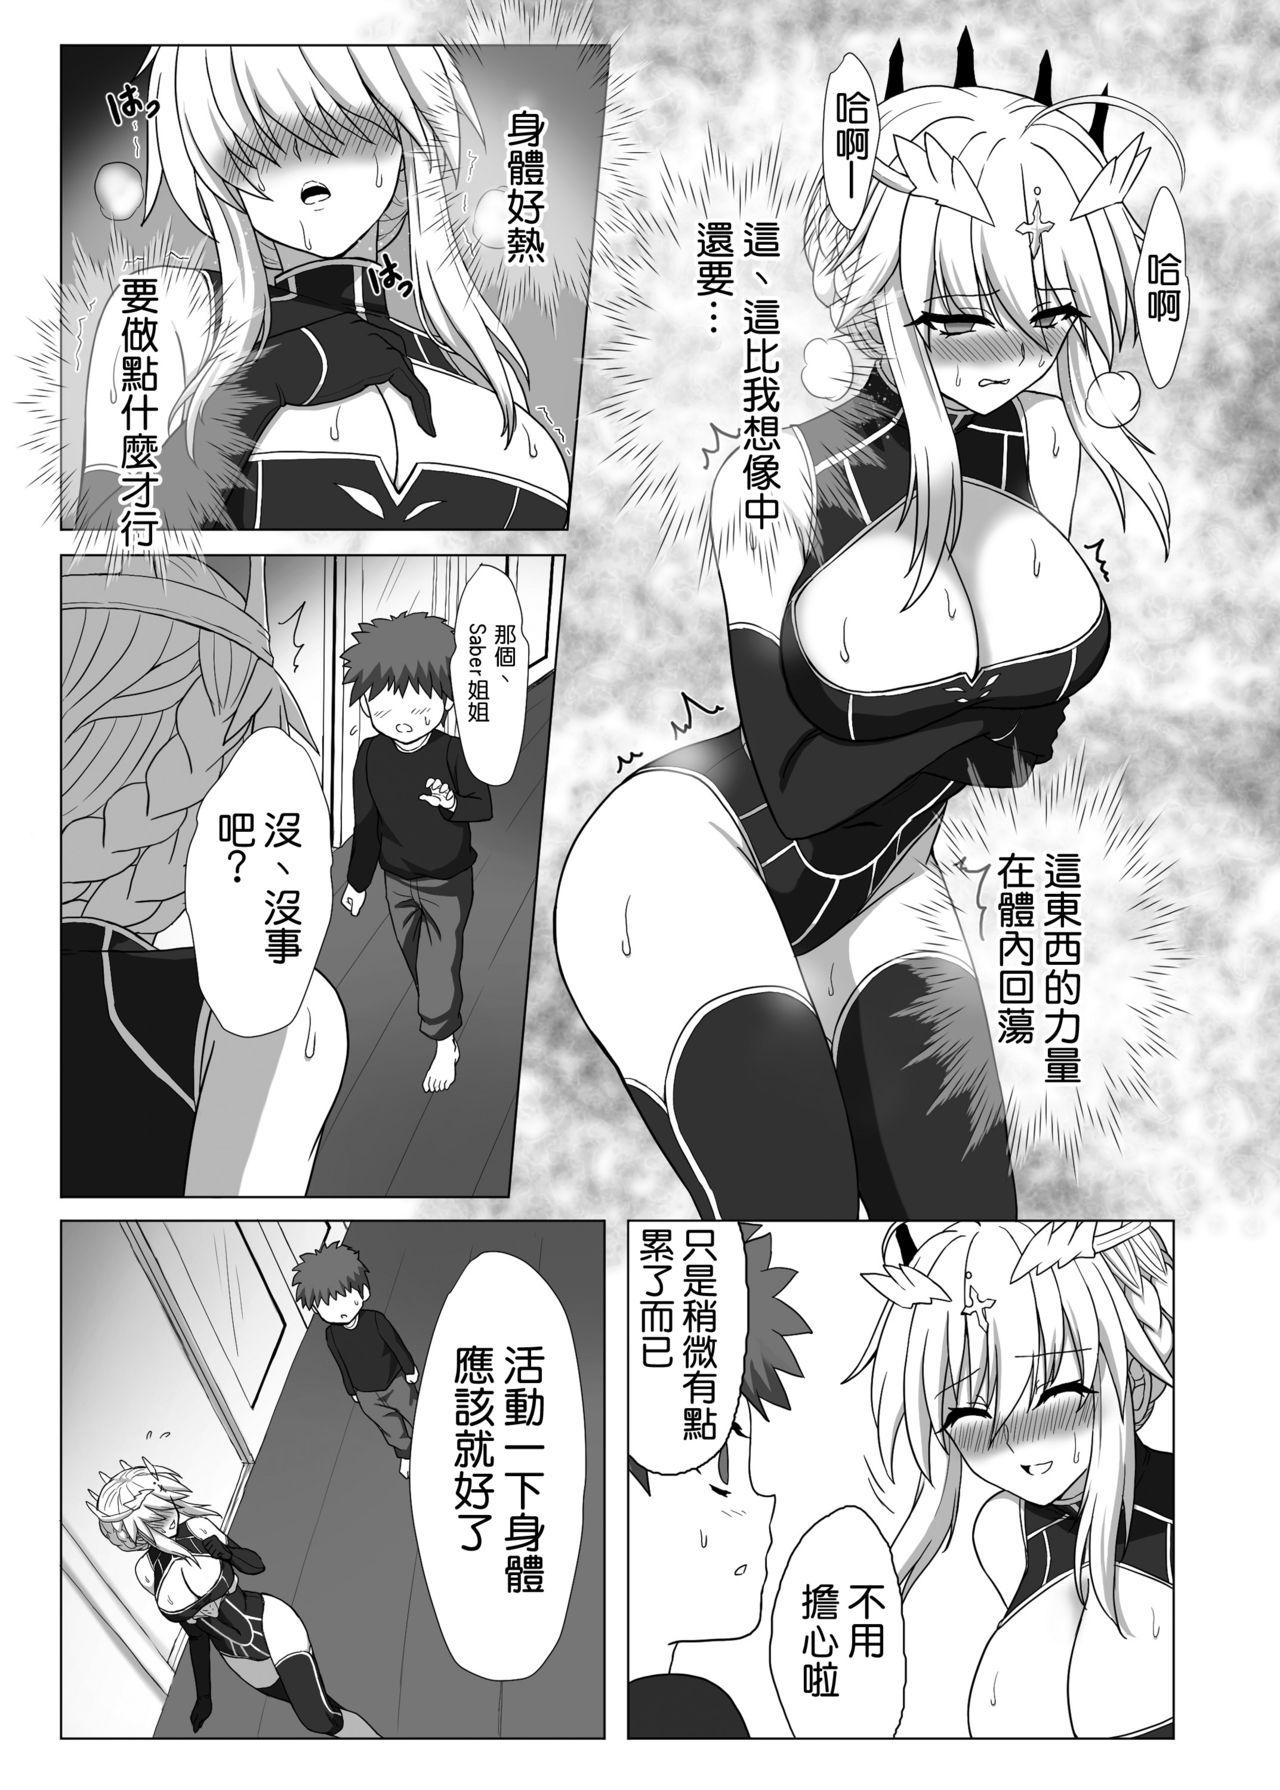 Cosplay Fate/NTR - Fate grand order Twinkstudios - Page 11